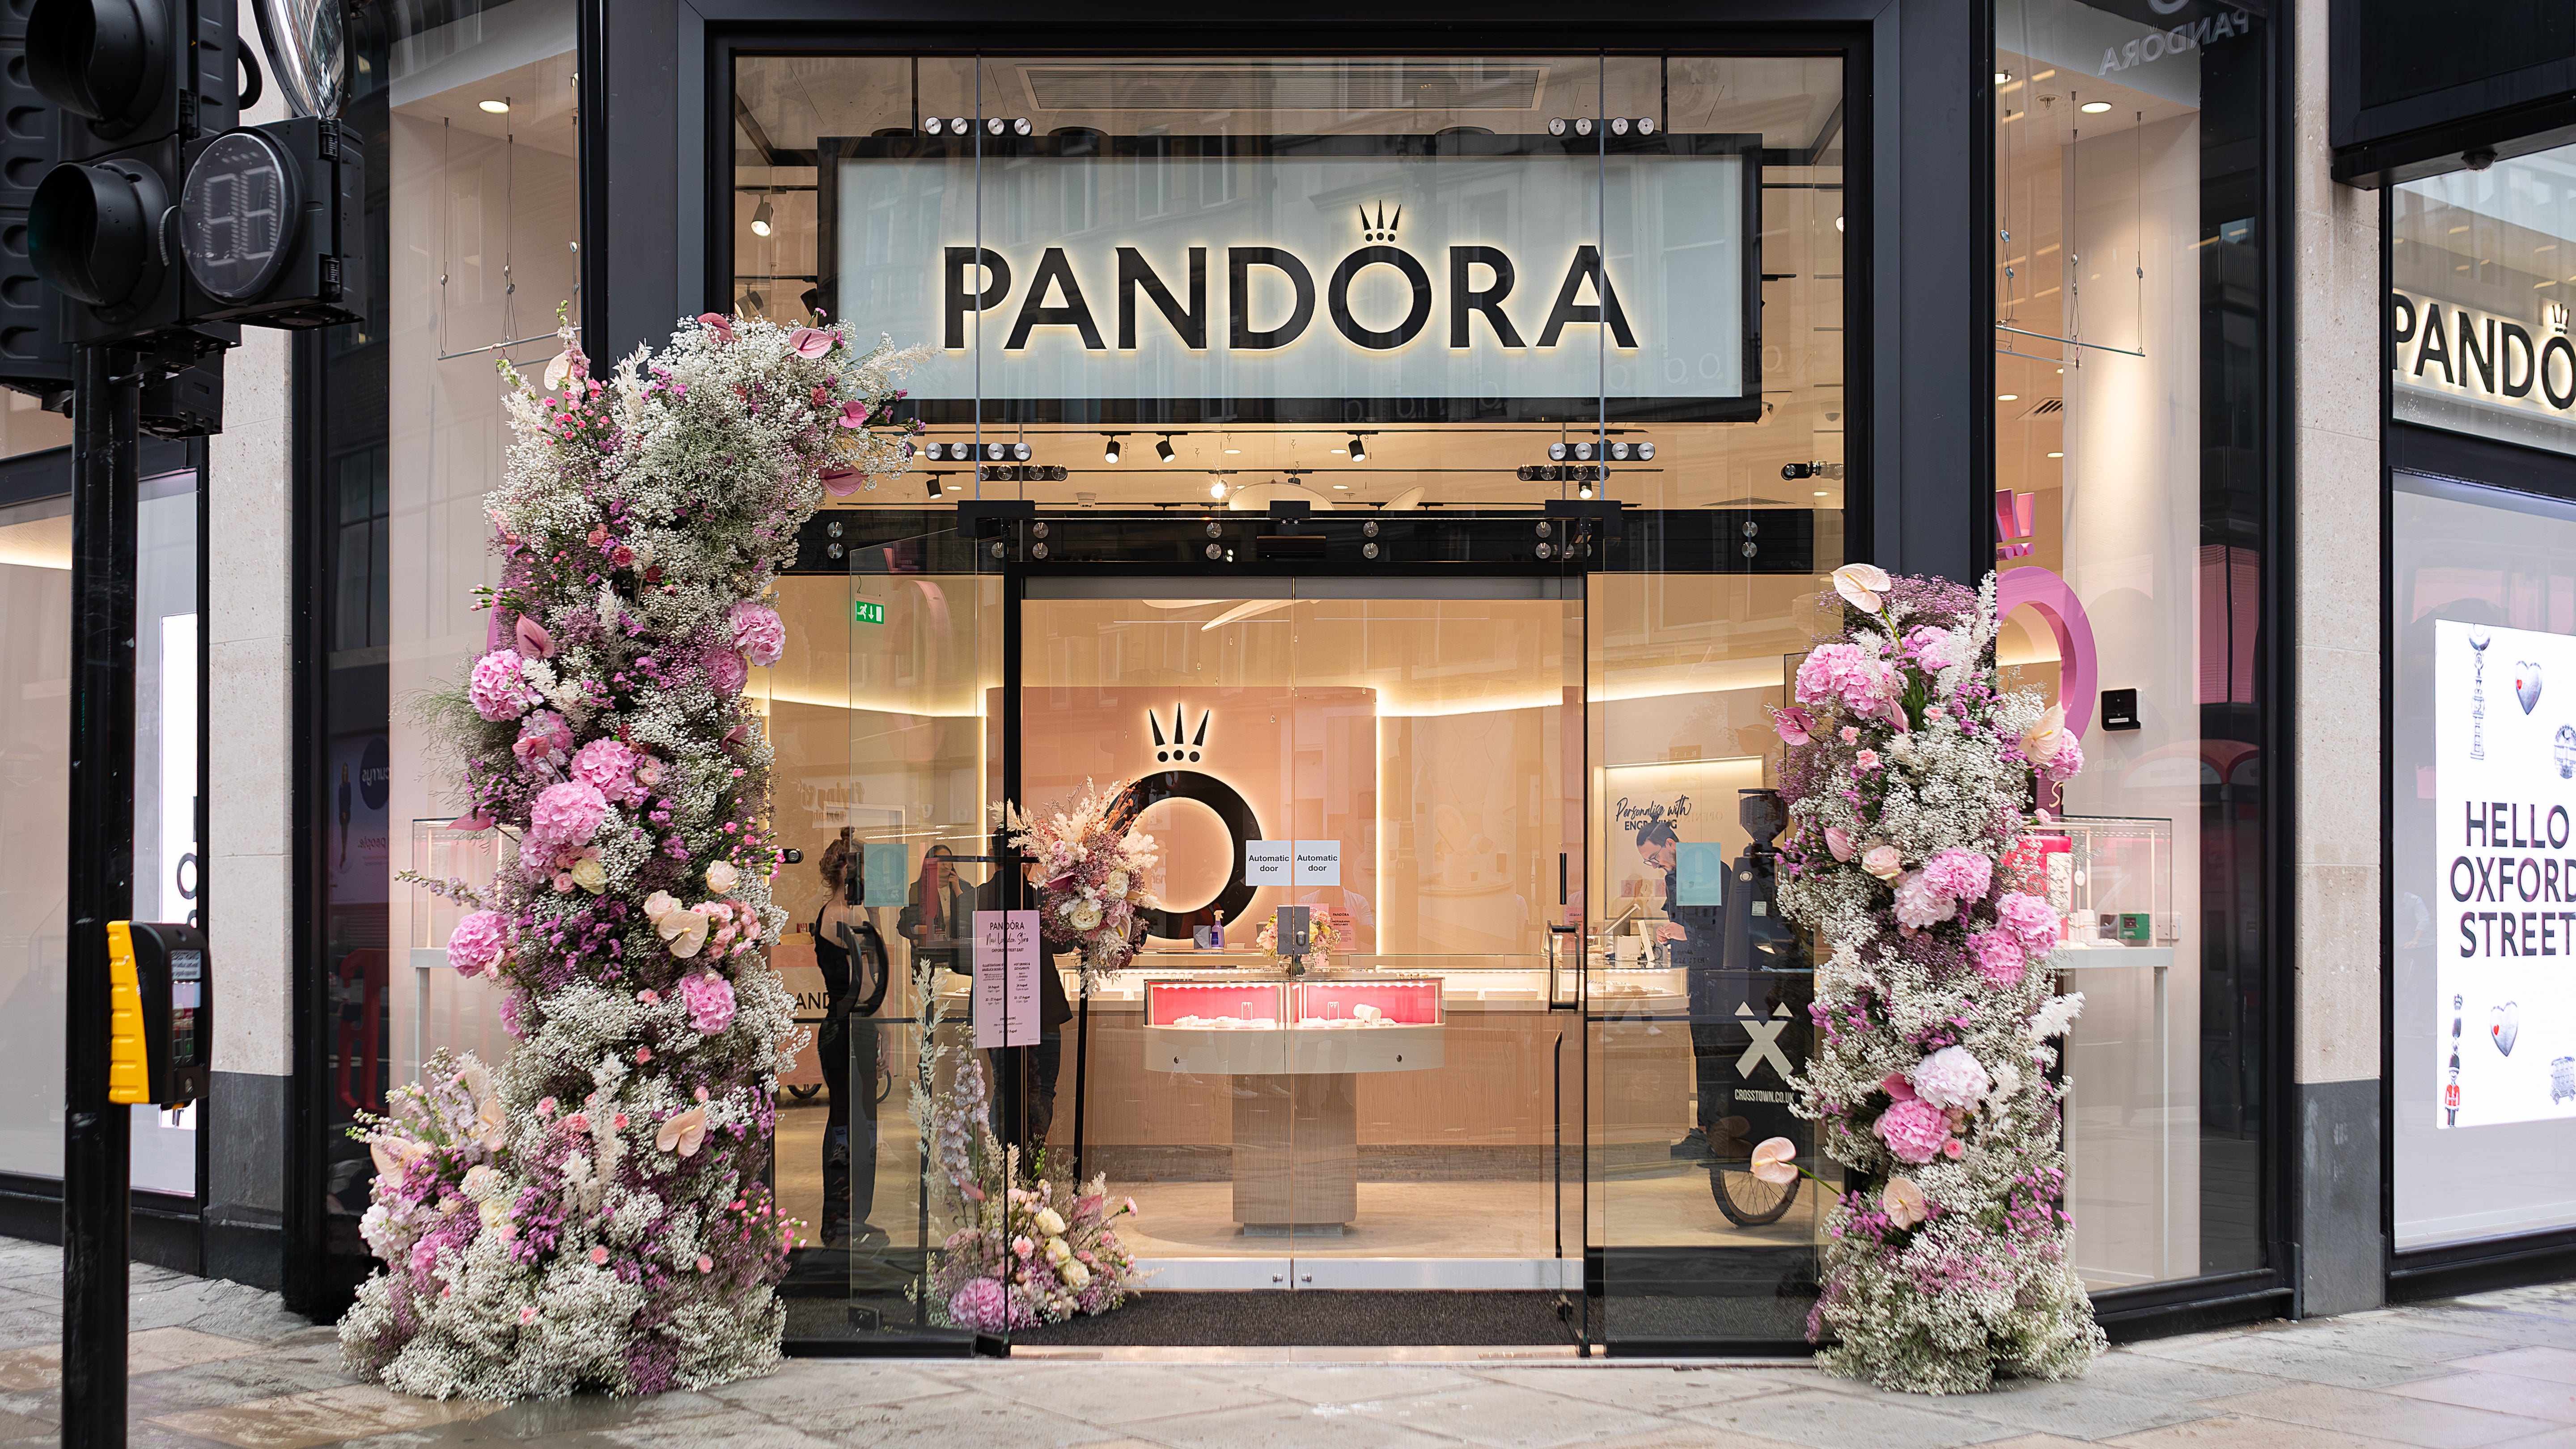 Exquisite floral entrance features by Amaranté for Pandora's store opening, blending a variety of stunning flowers with delicate pink accents, perfectly reflecting Pandora's brand identity.